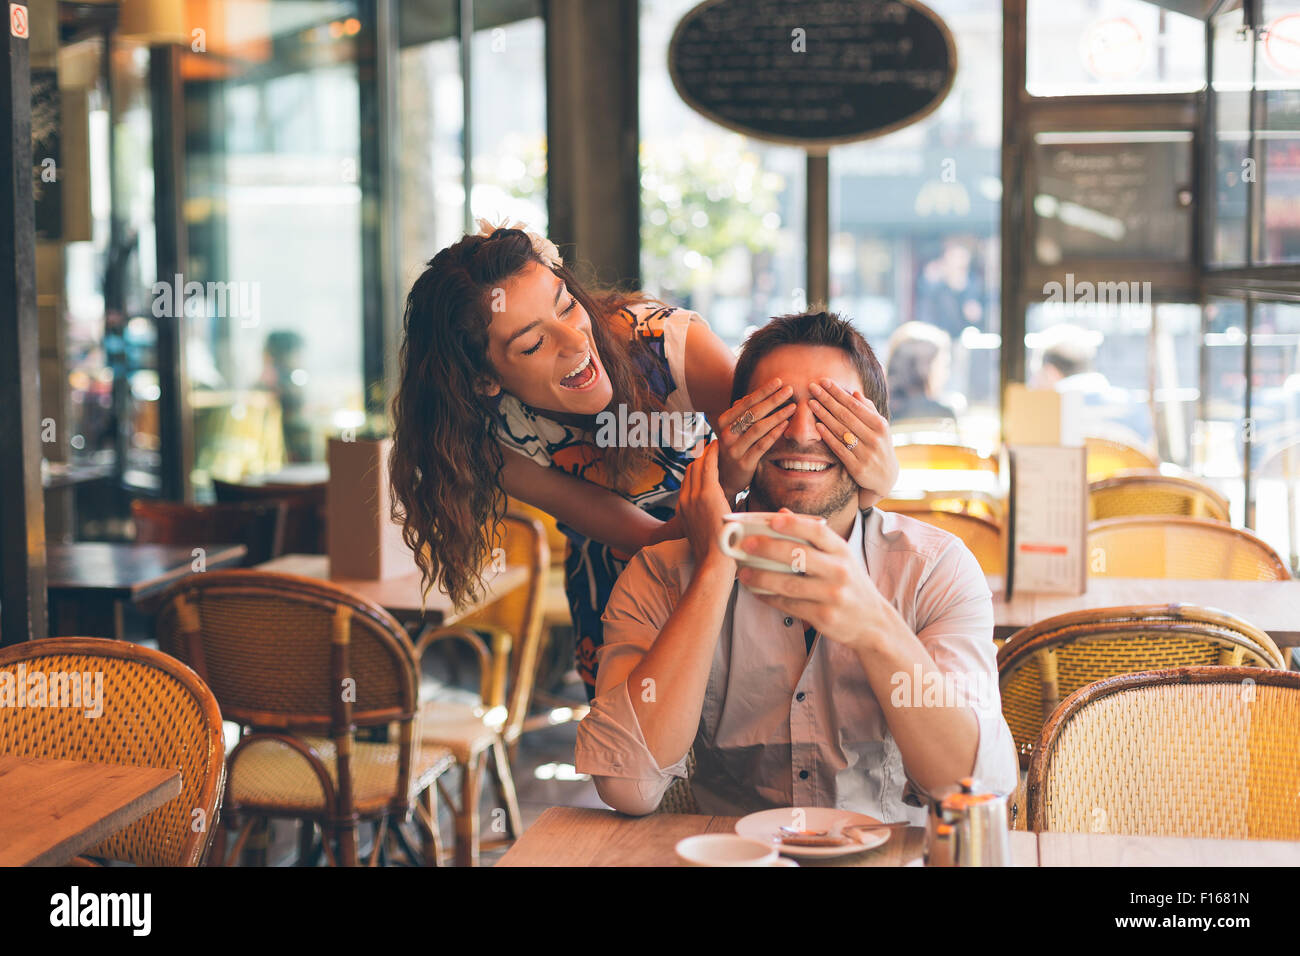 Couple dating in Cafe, Paris Stock Photo